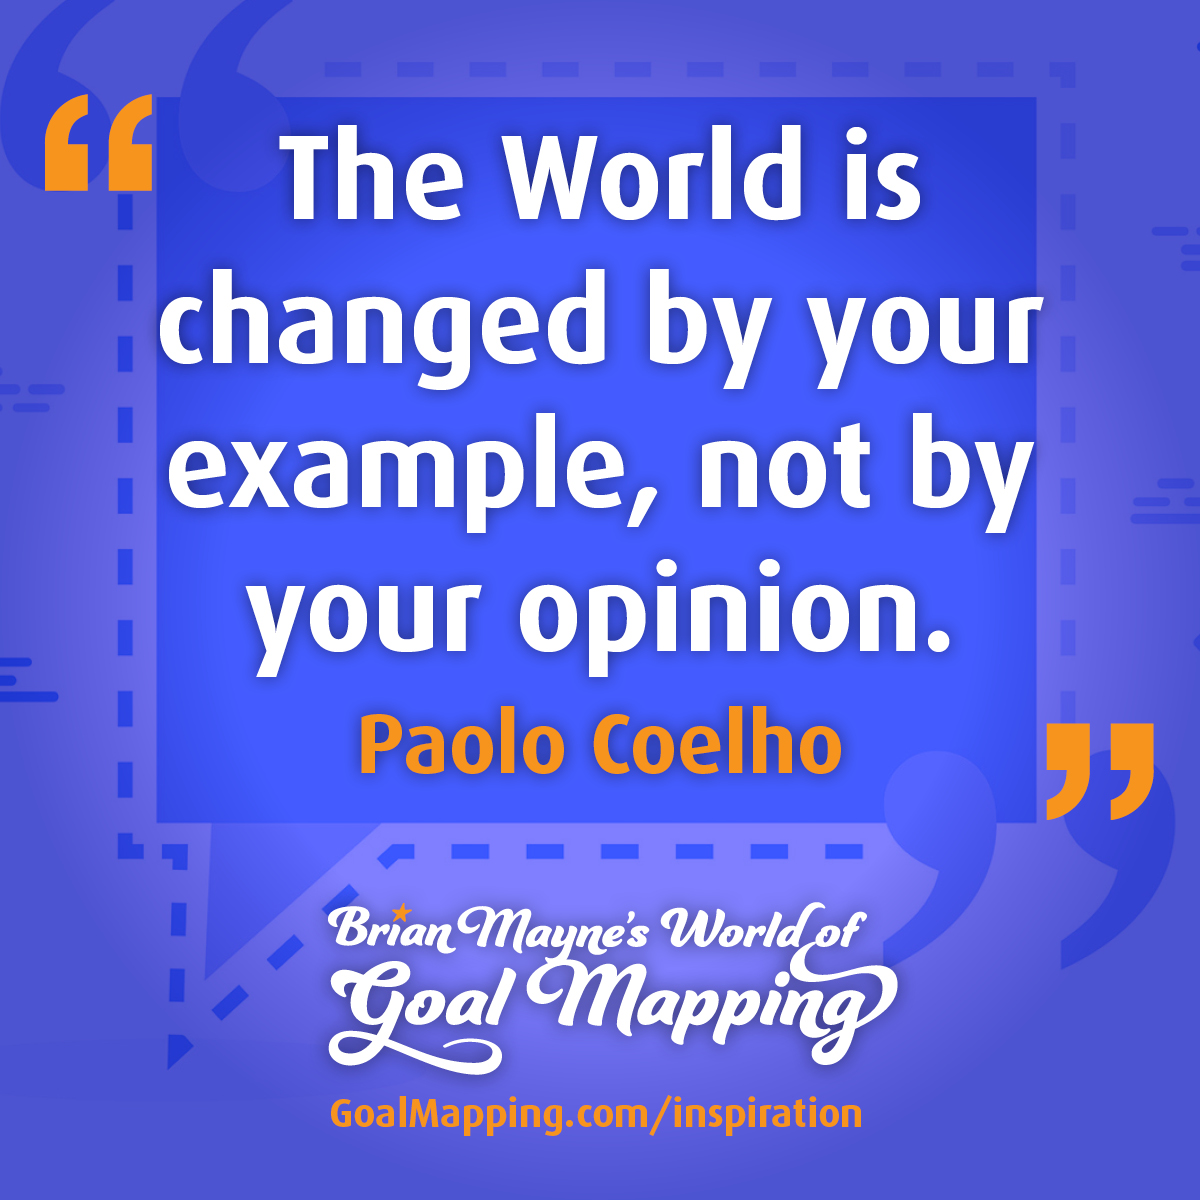 "The World is changed by your example, not by your opinion." Paolo Coelho